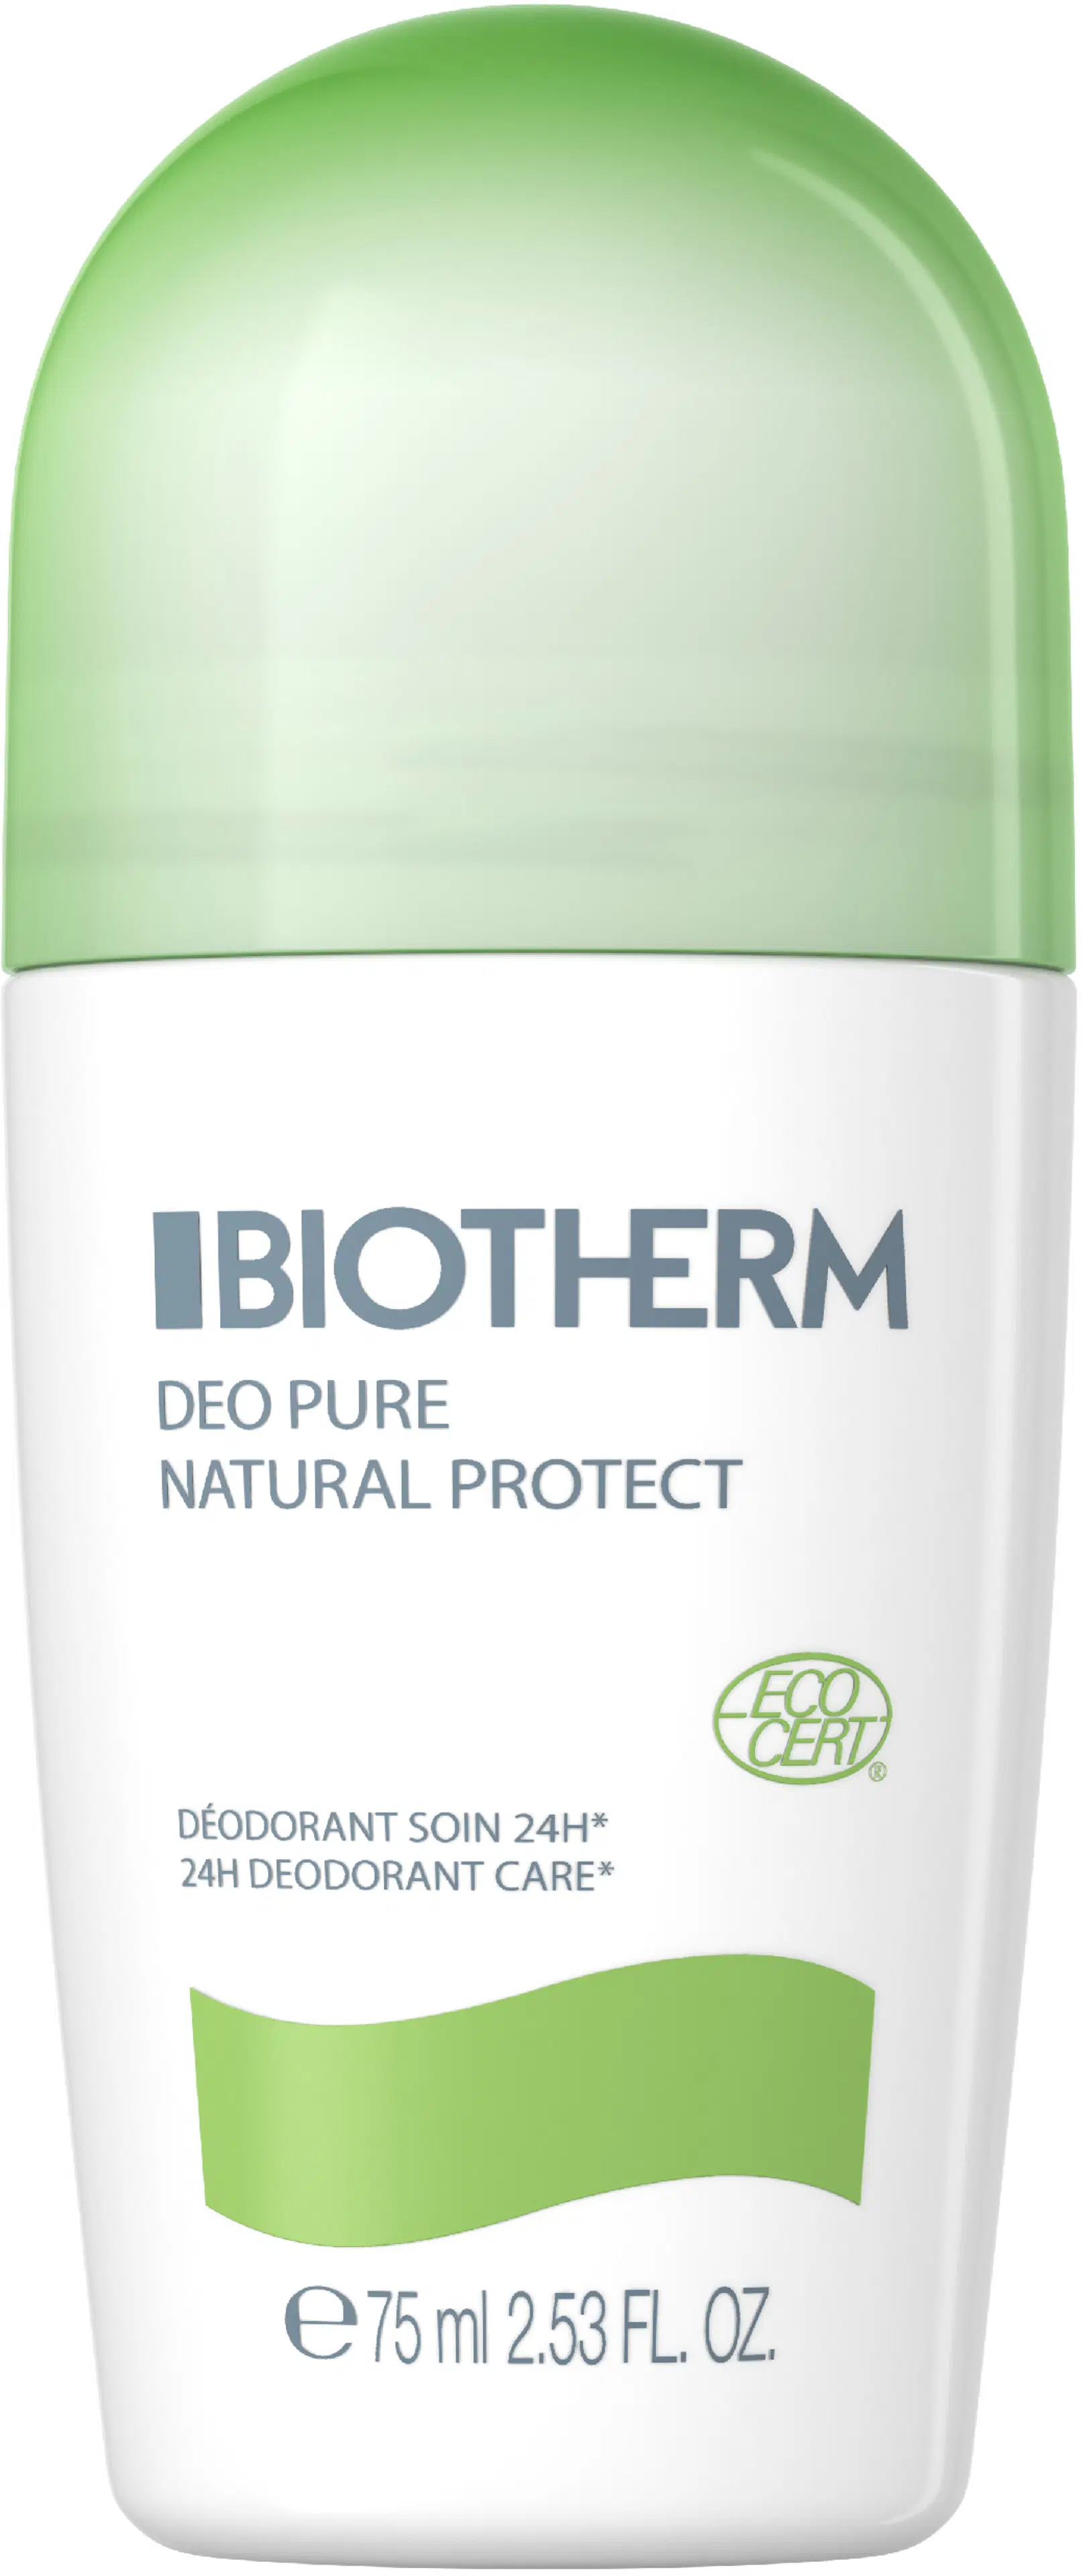 Biotherm Deo Pure Natural Protect deodorantti 75 ml